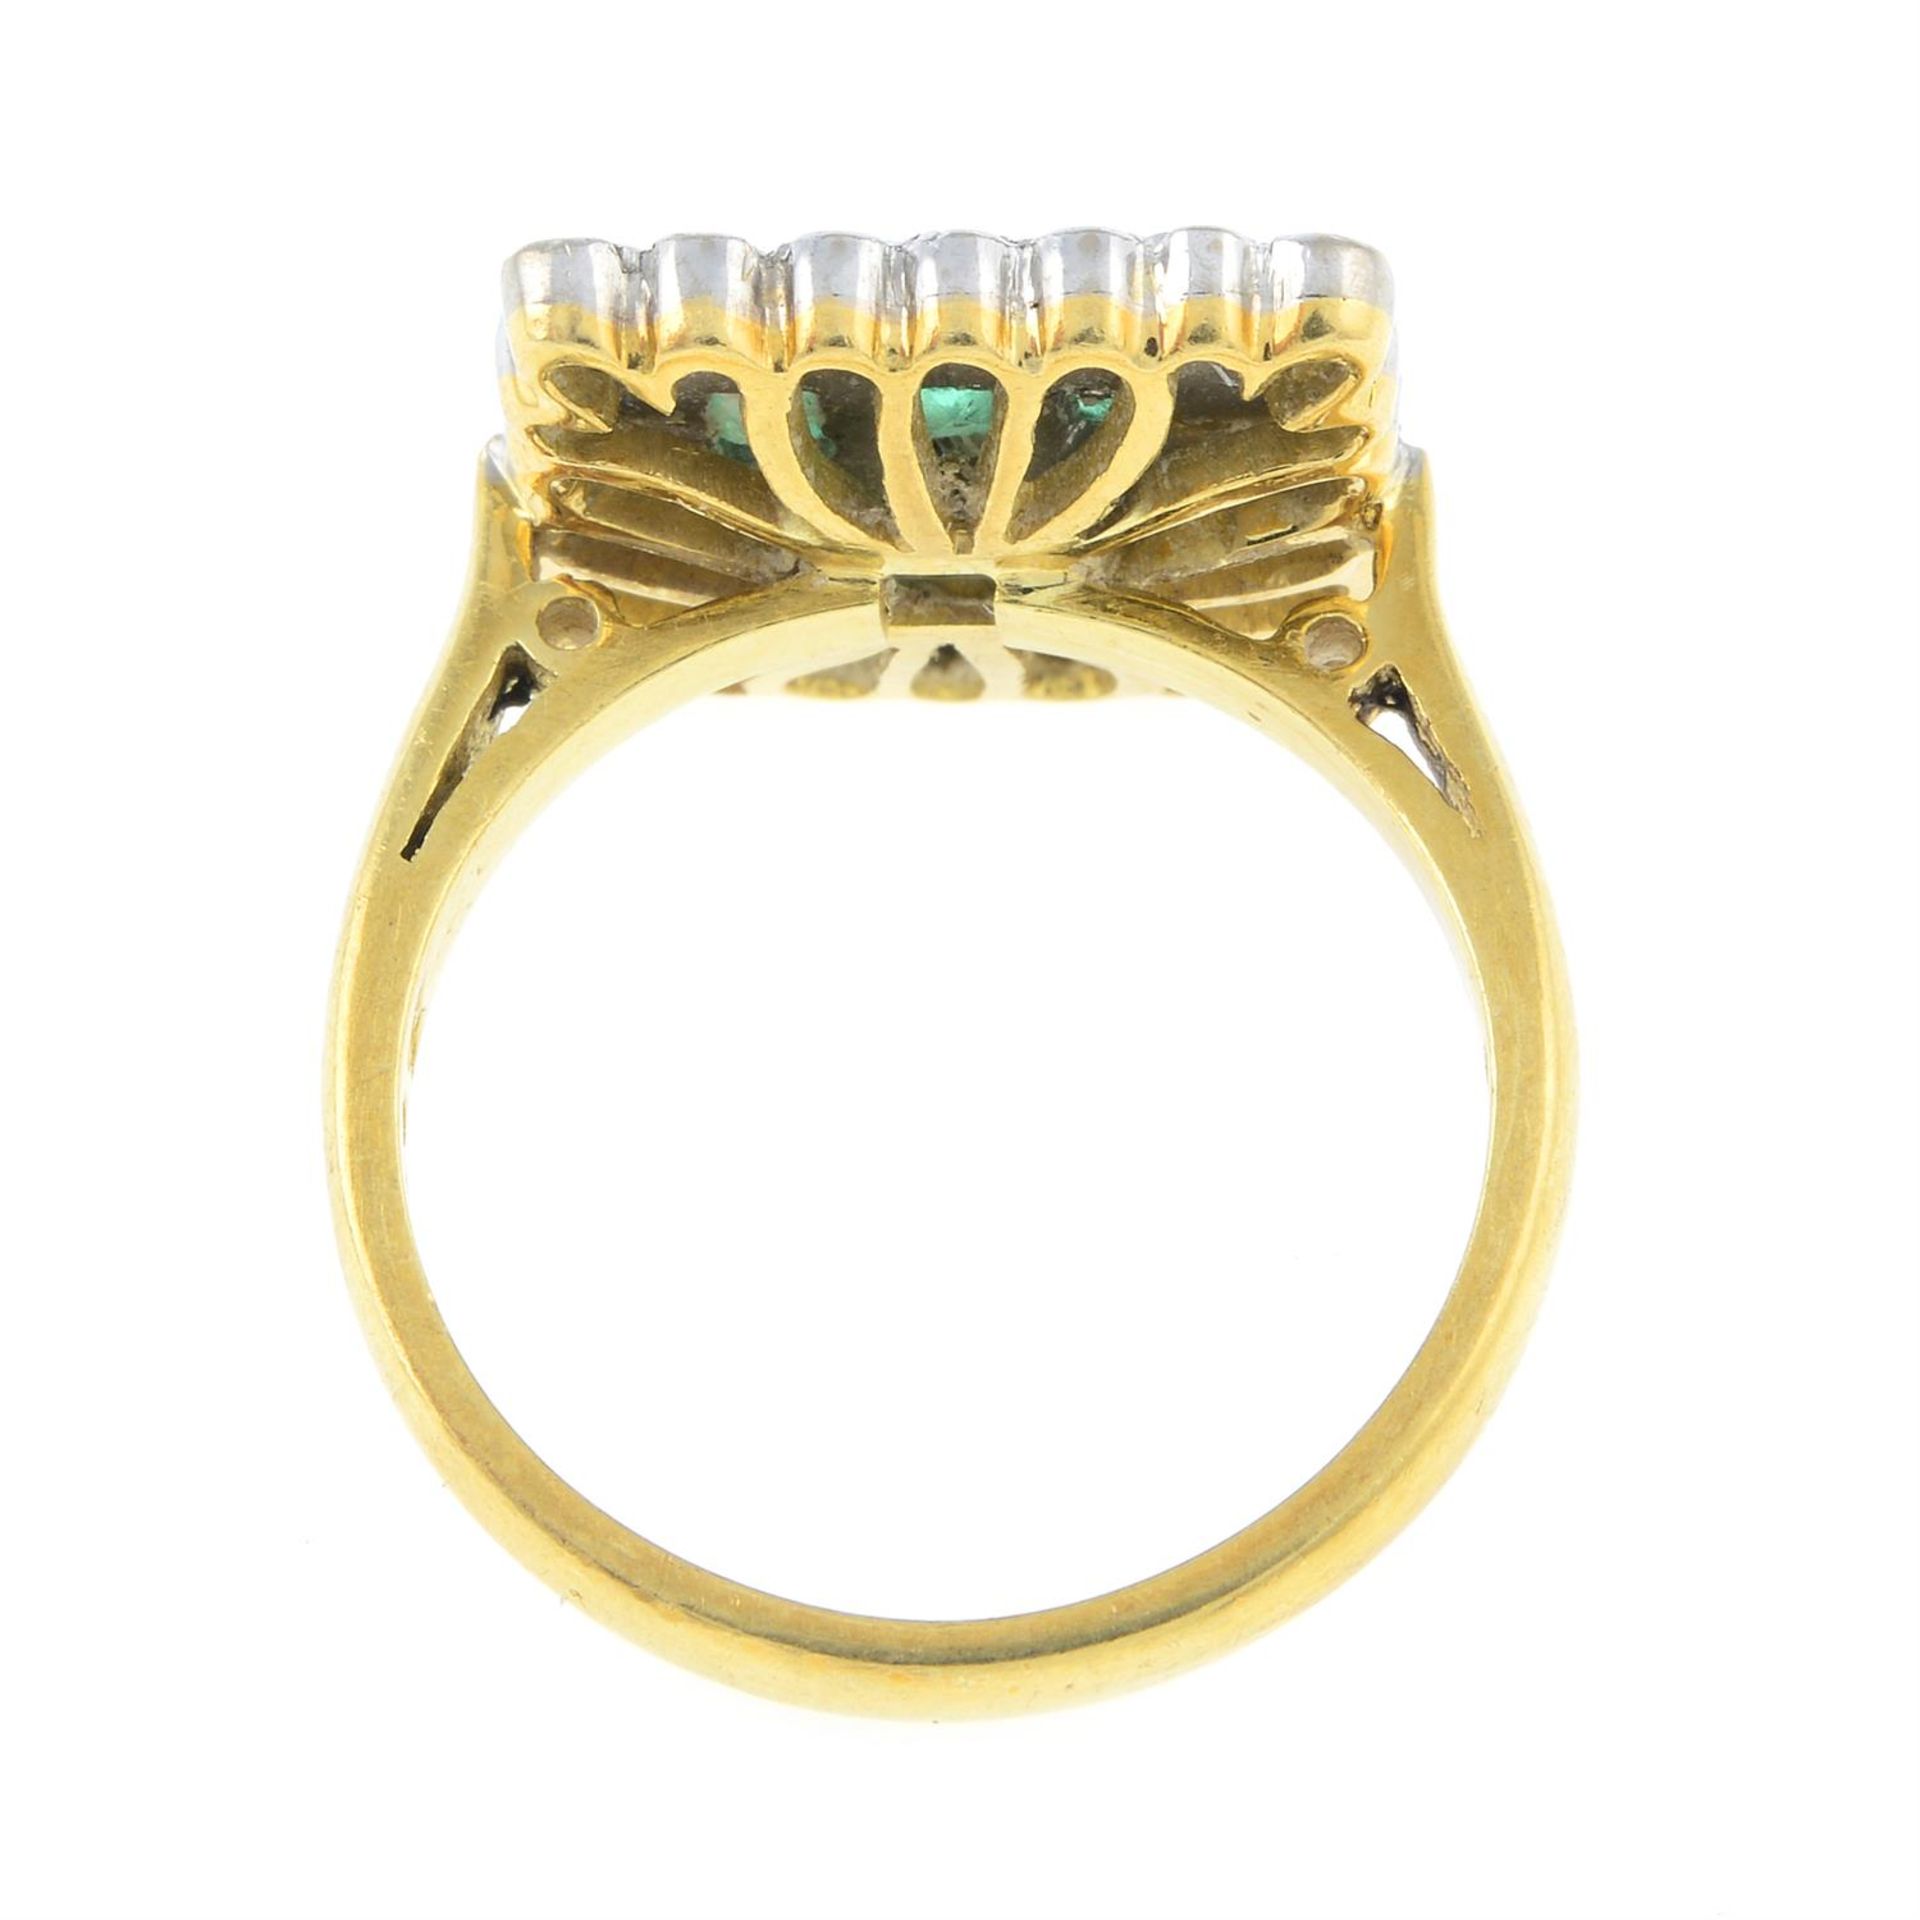 An 18ct gold emerald and diamond dress ring. - Image 2 of 2